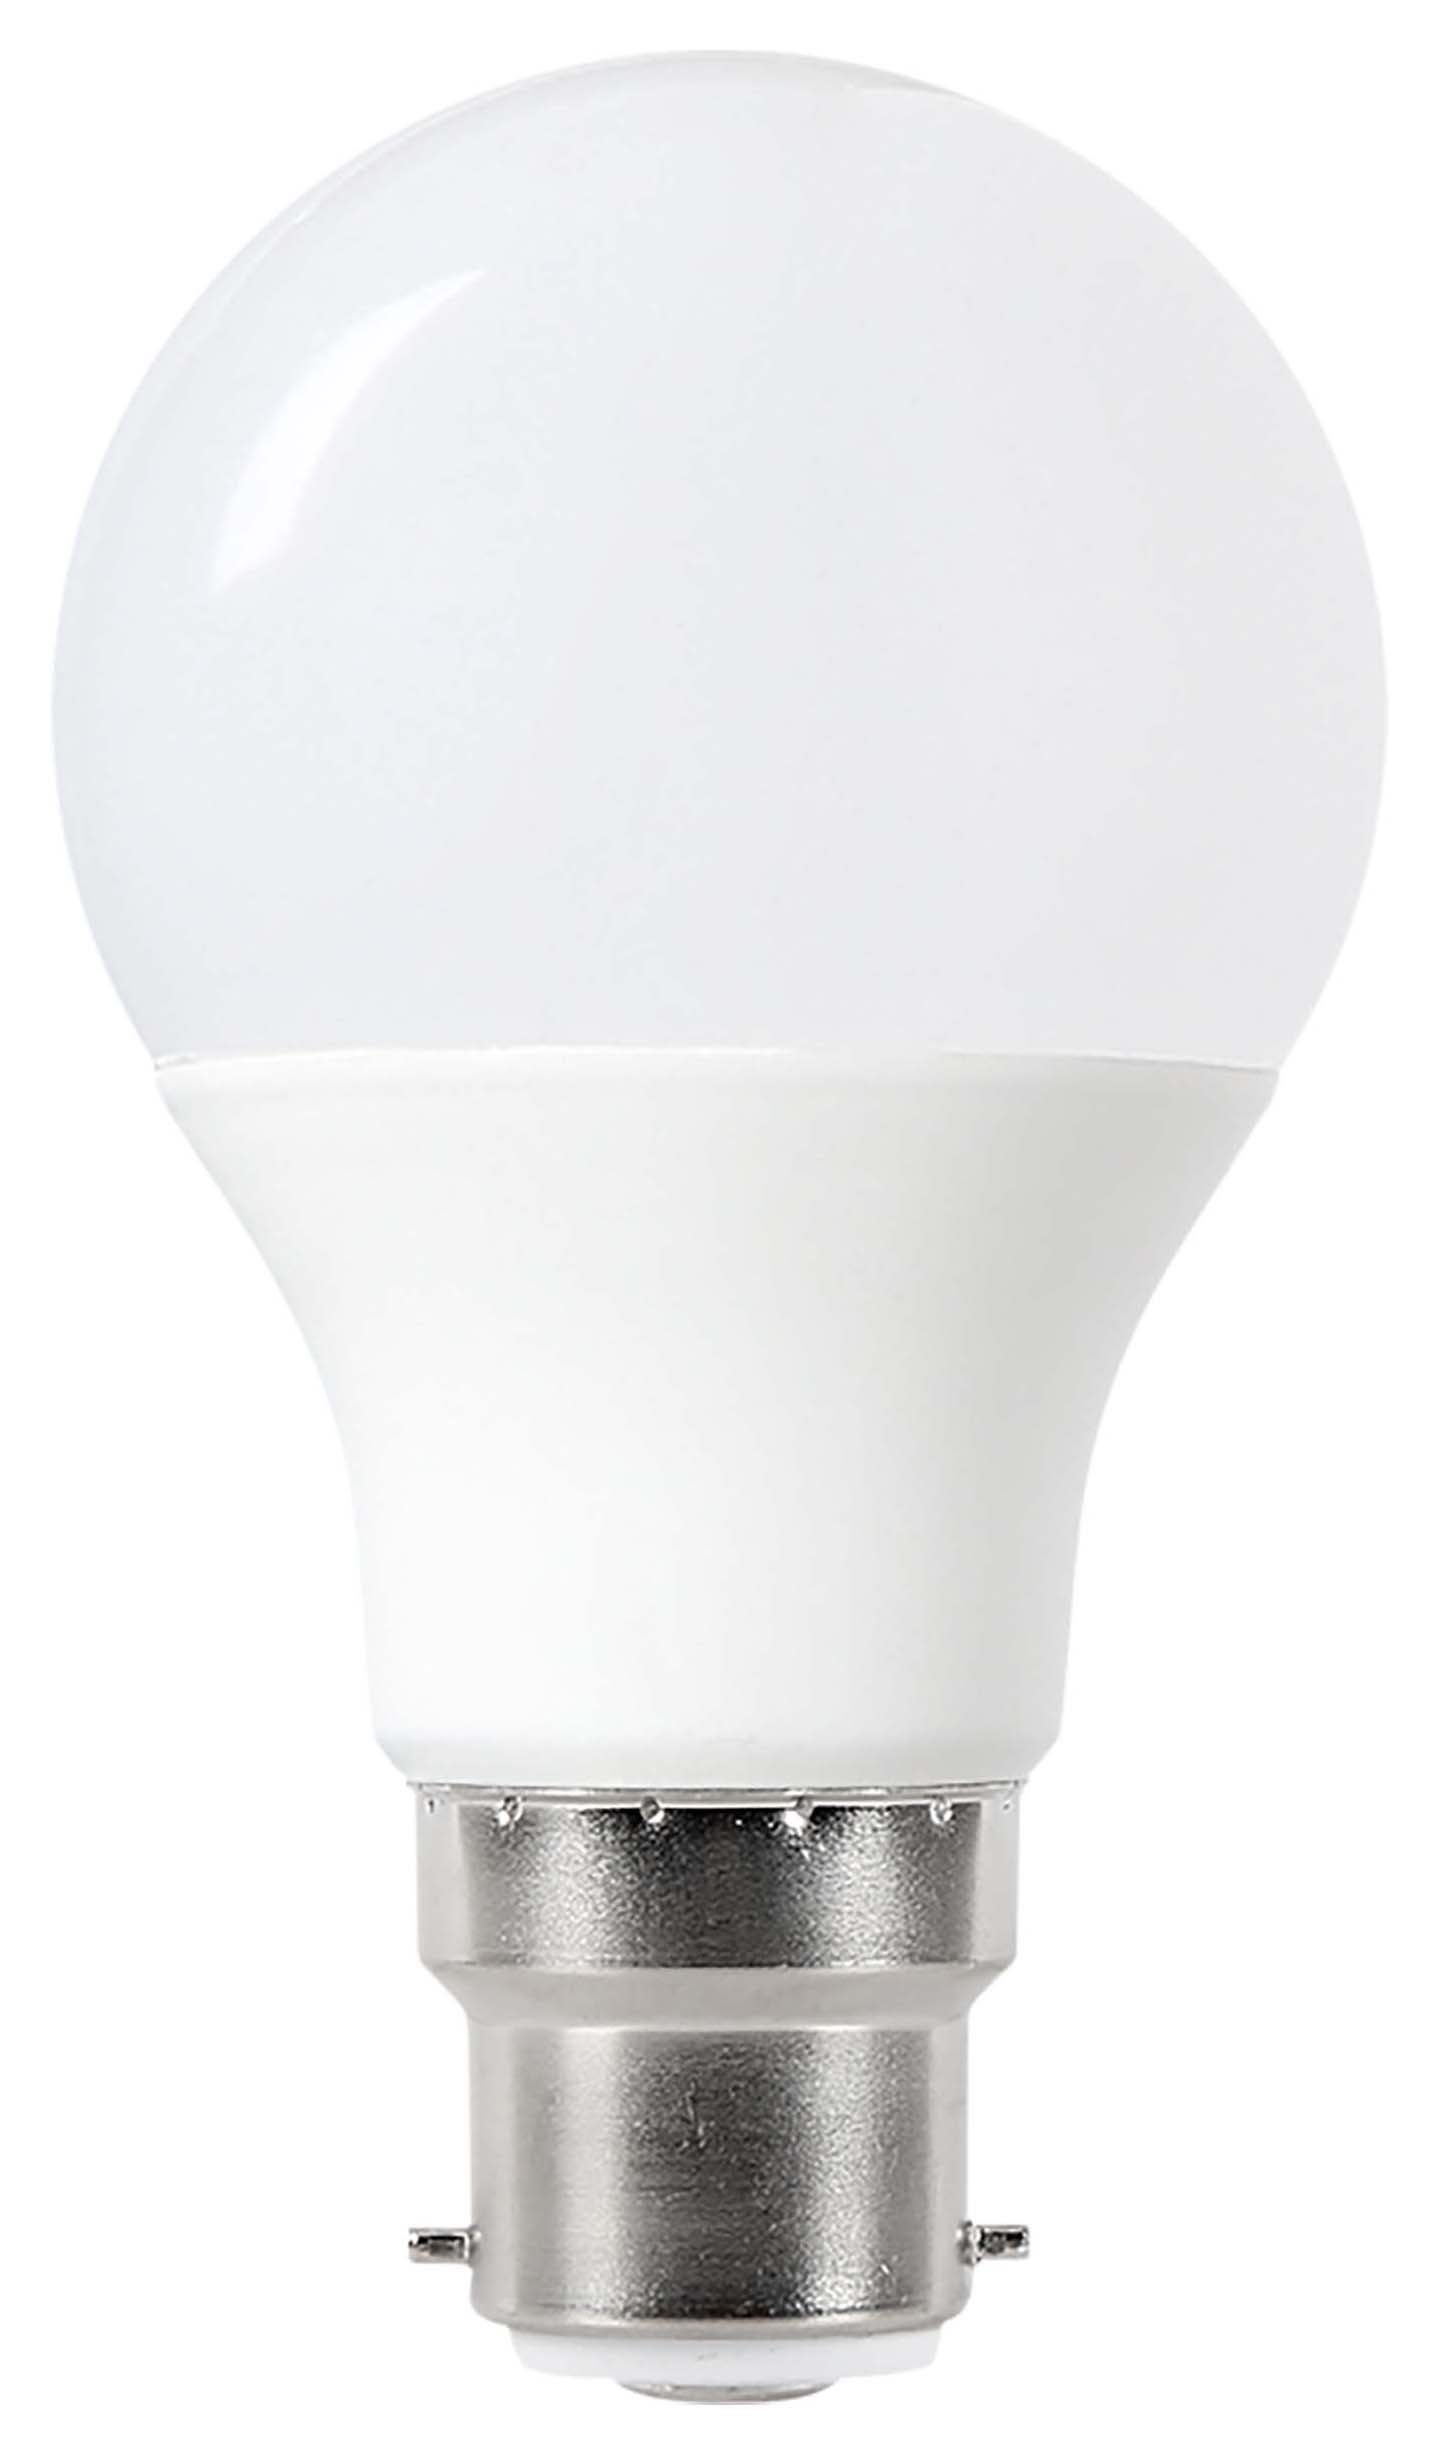 Image of Wickes Non-Dimmable GLS Opal LED B22 4.8W Warm White Light Bulb